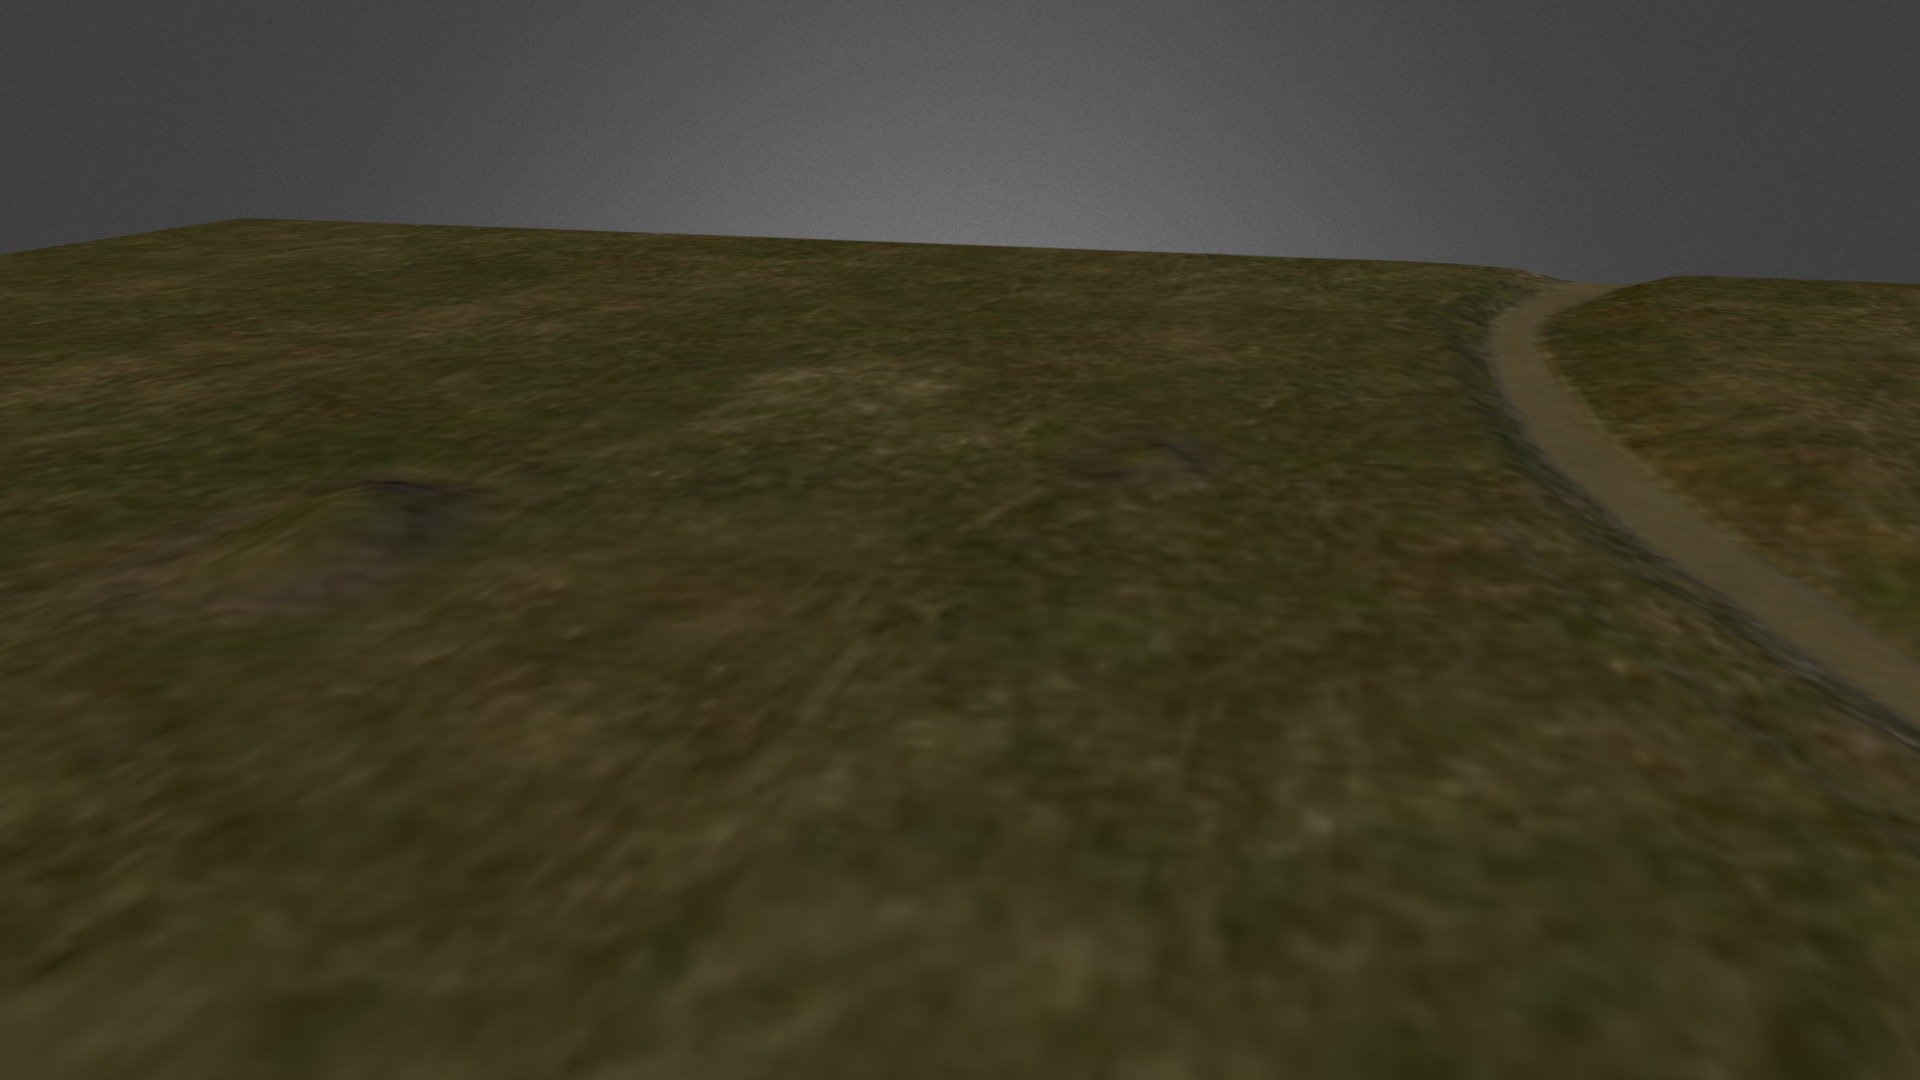 Simple terrain model of Carter Mound site in Mississippi. Created in L3DT from DEM data exported from ArcMap 3d model